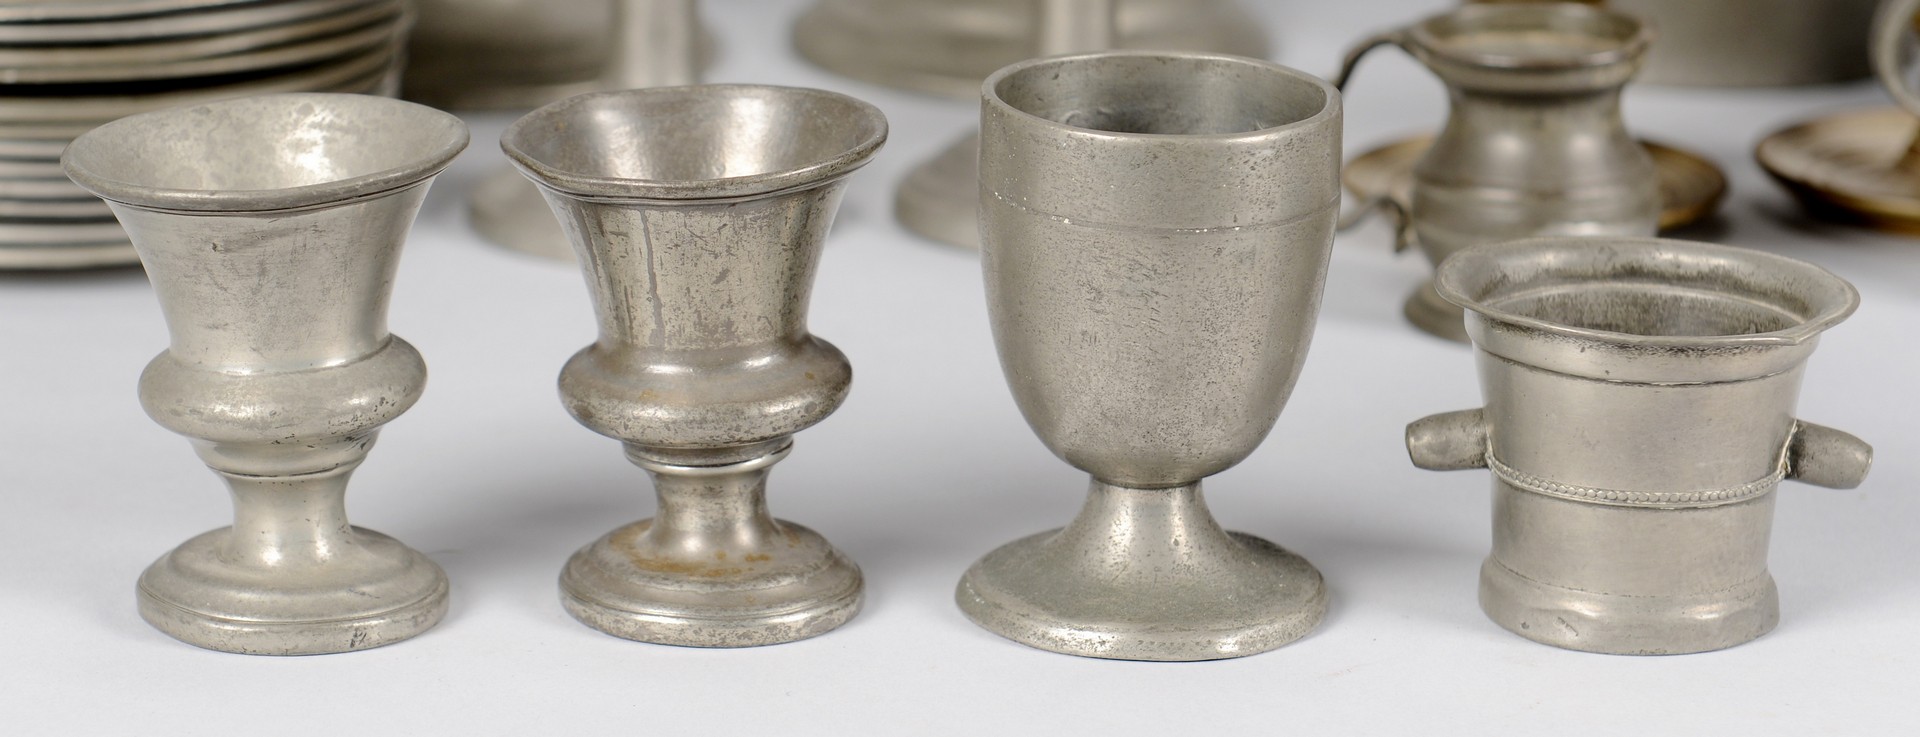 Lot 316: Assorted pewter and lighting, 51 items